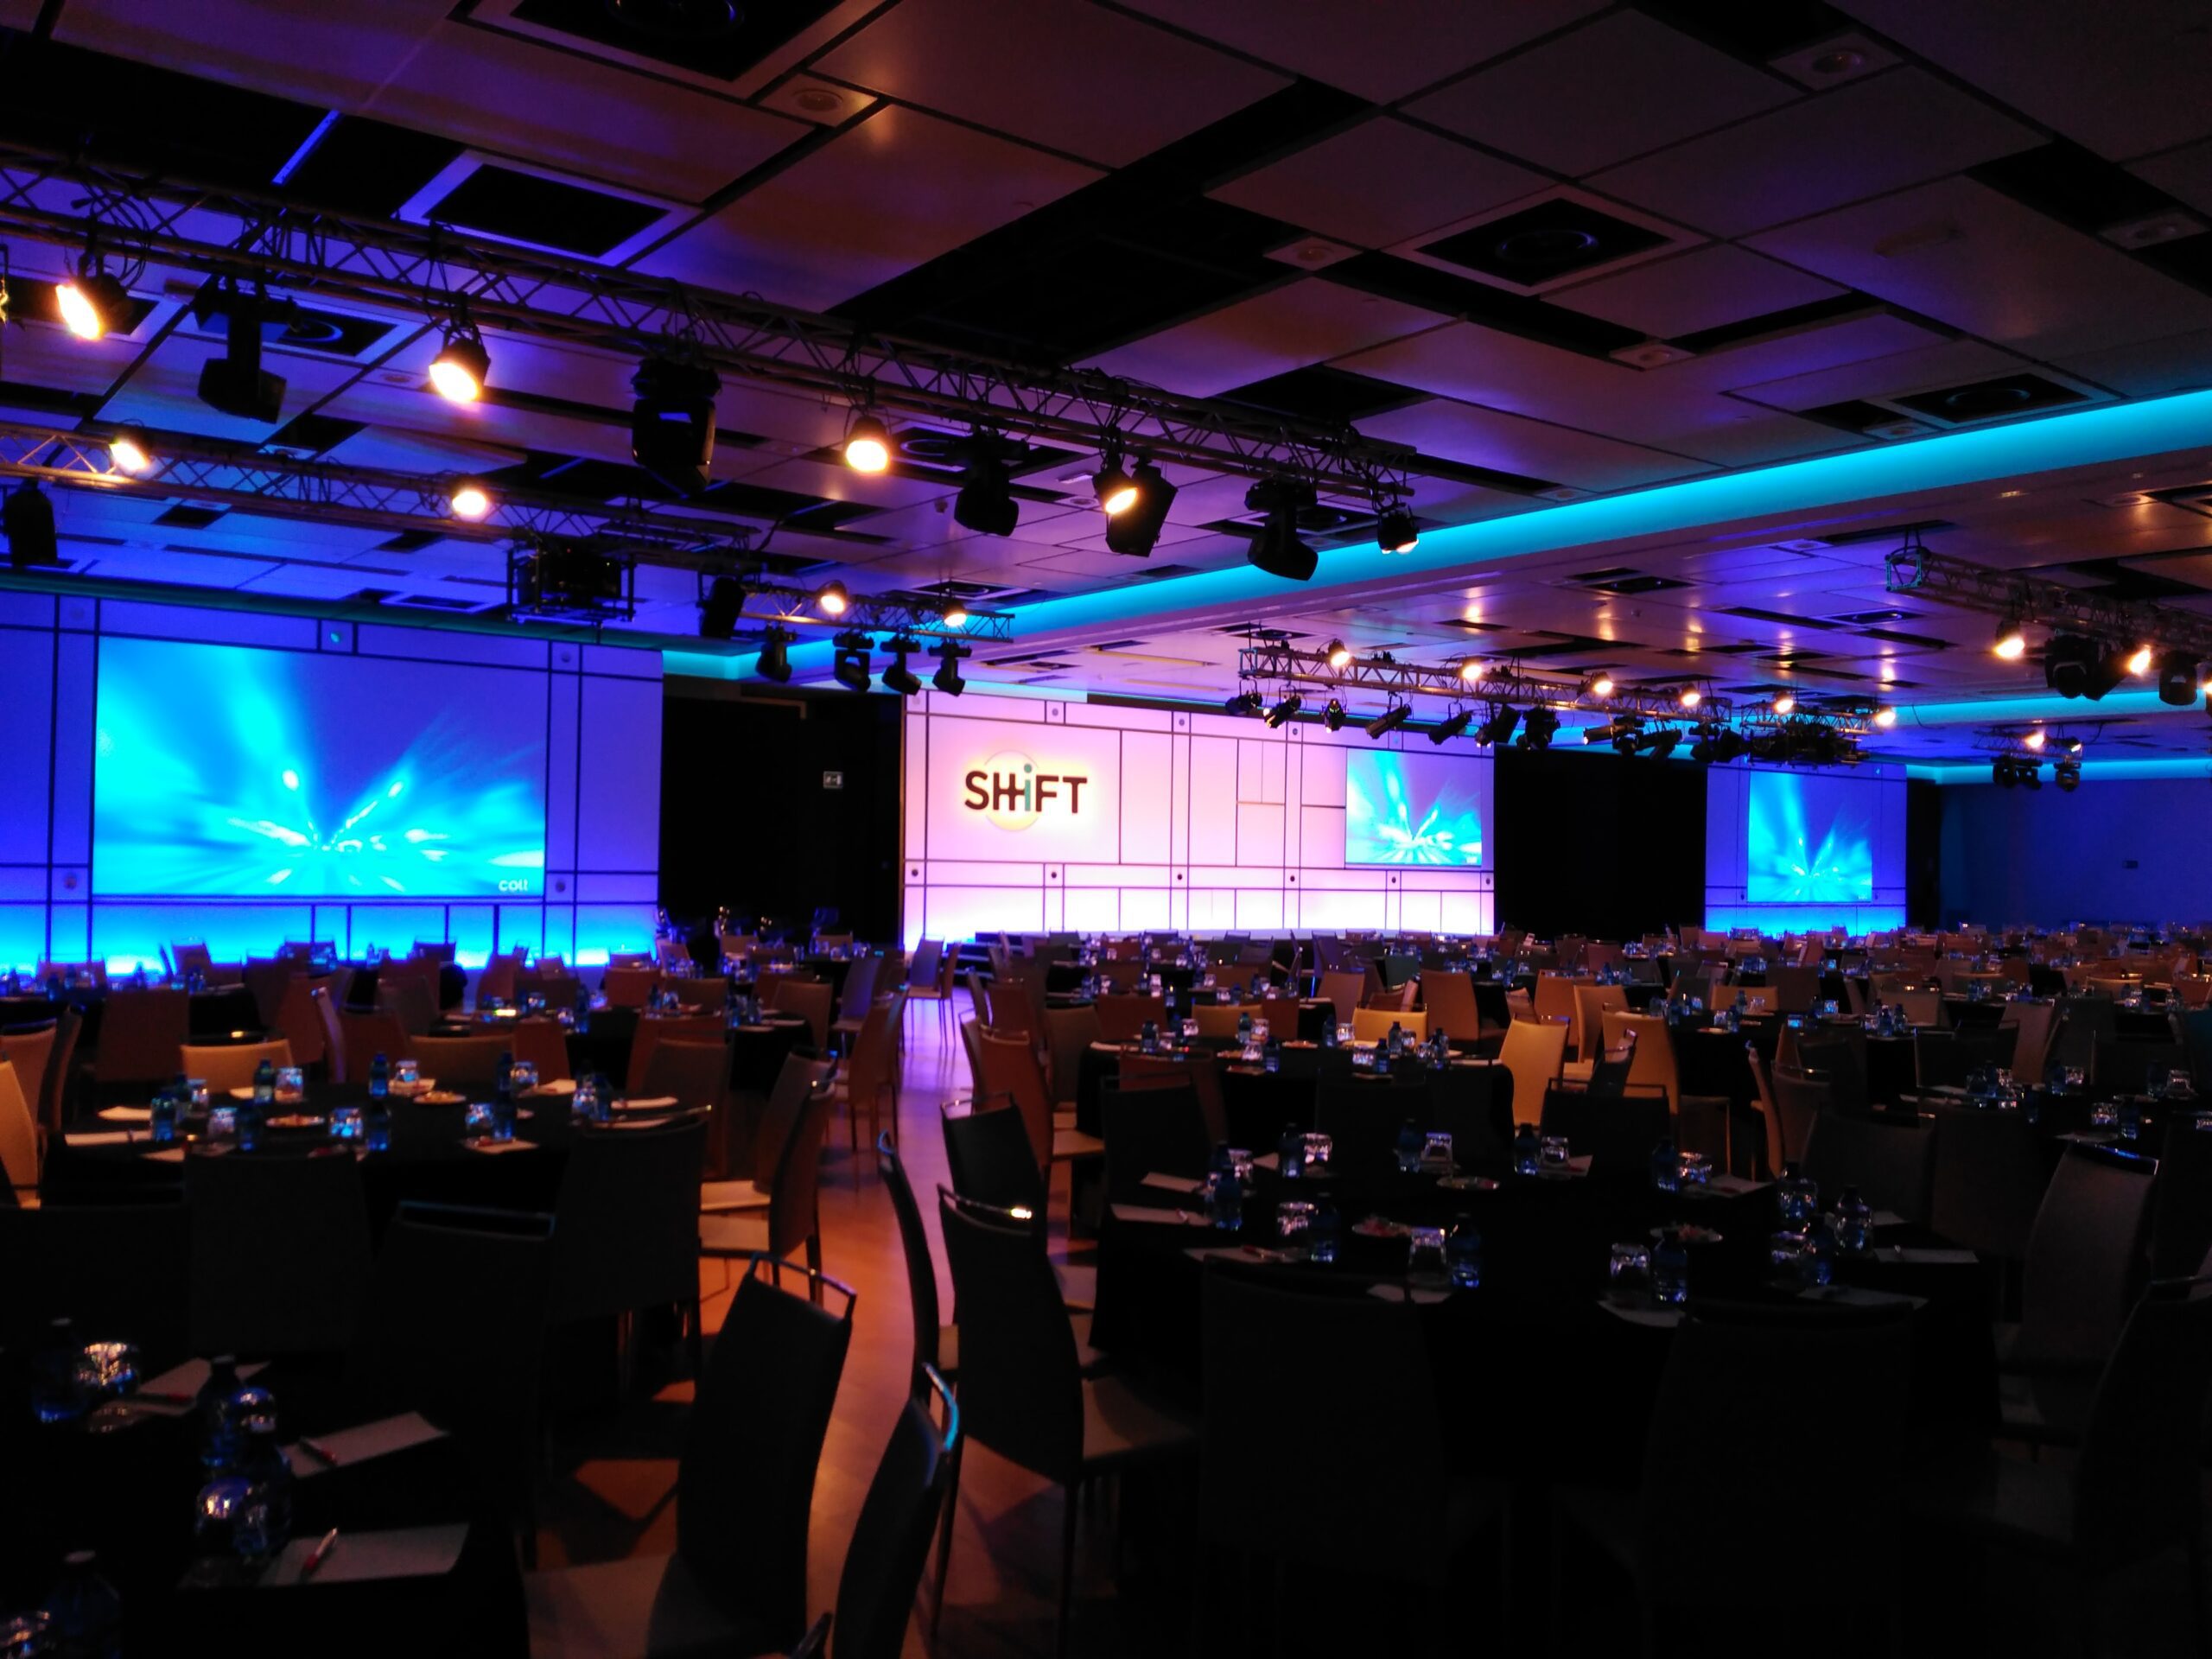 Shift corporate event at the Marriot Madrid (2)